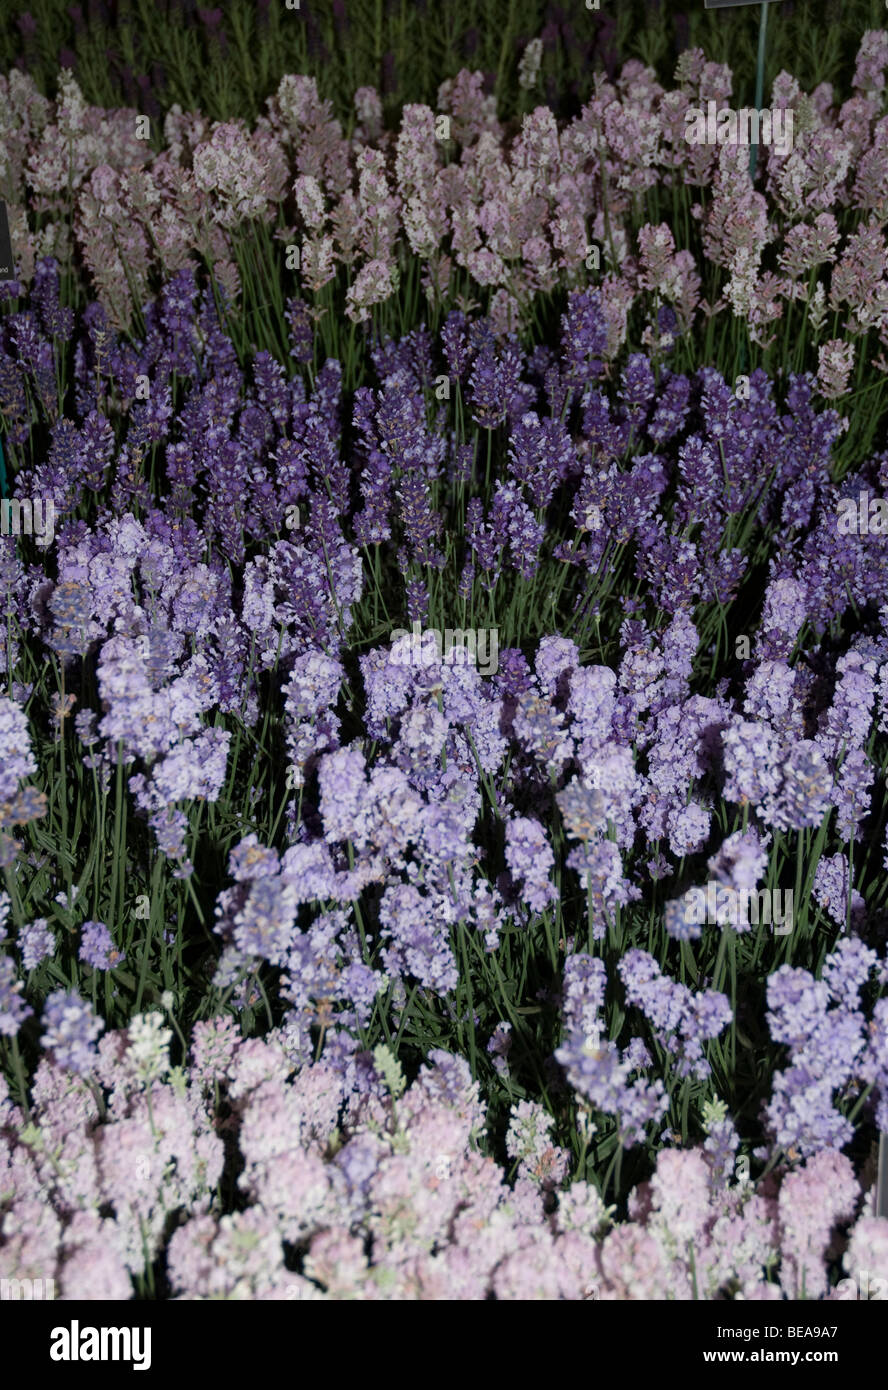 Different shades of lavender from white through mauve and lilac to dark purple, all in flower, West London Stock Photo